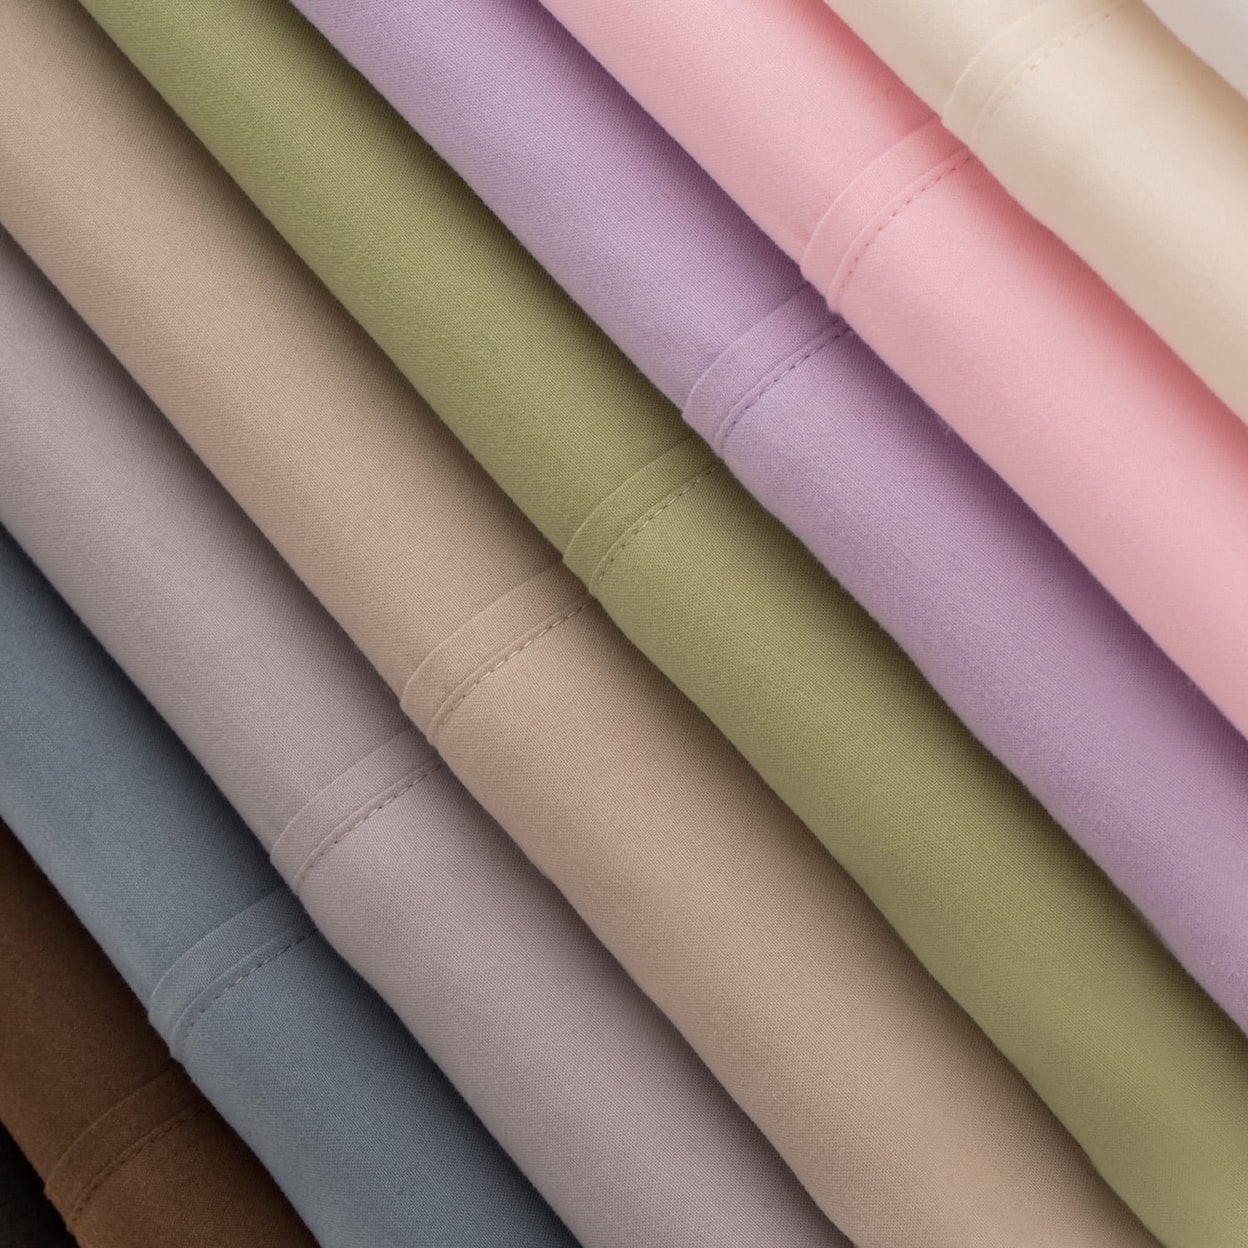 Malouf Brushed Microfiber Full Pacific Sheets